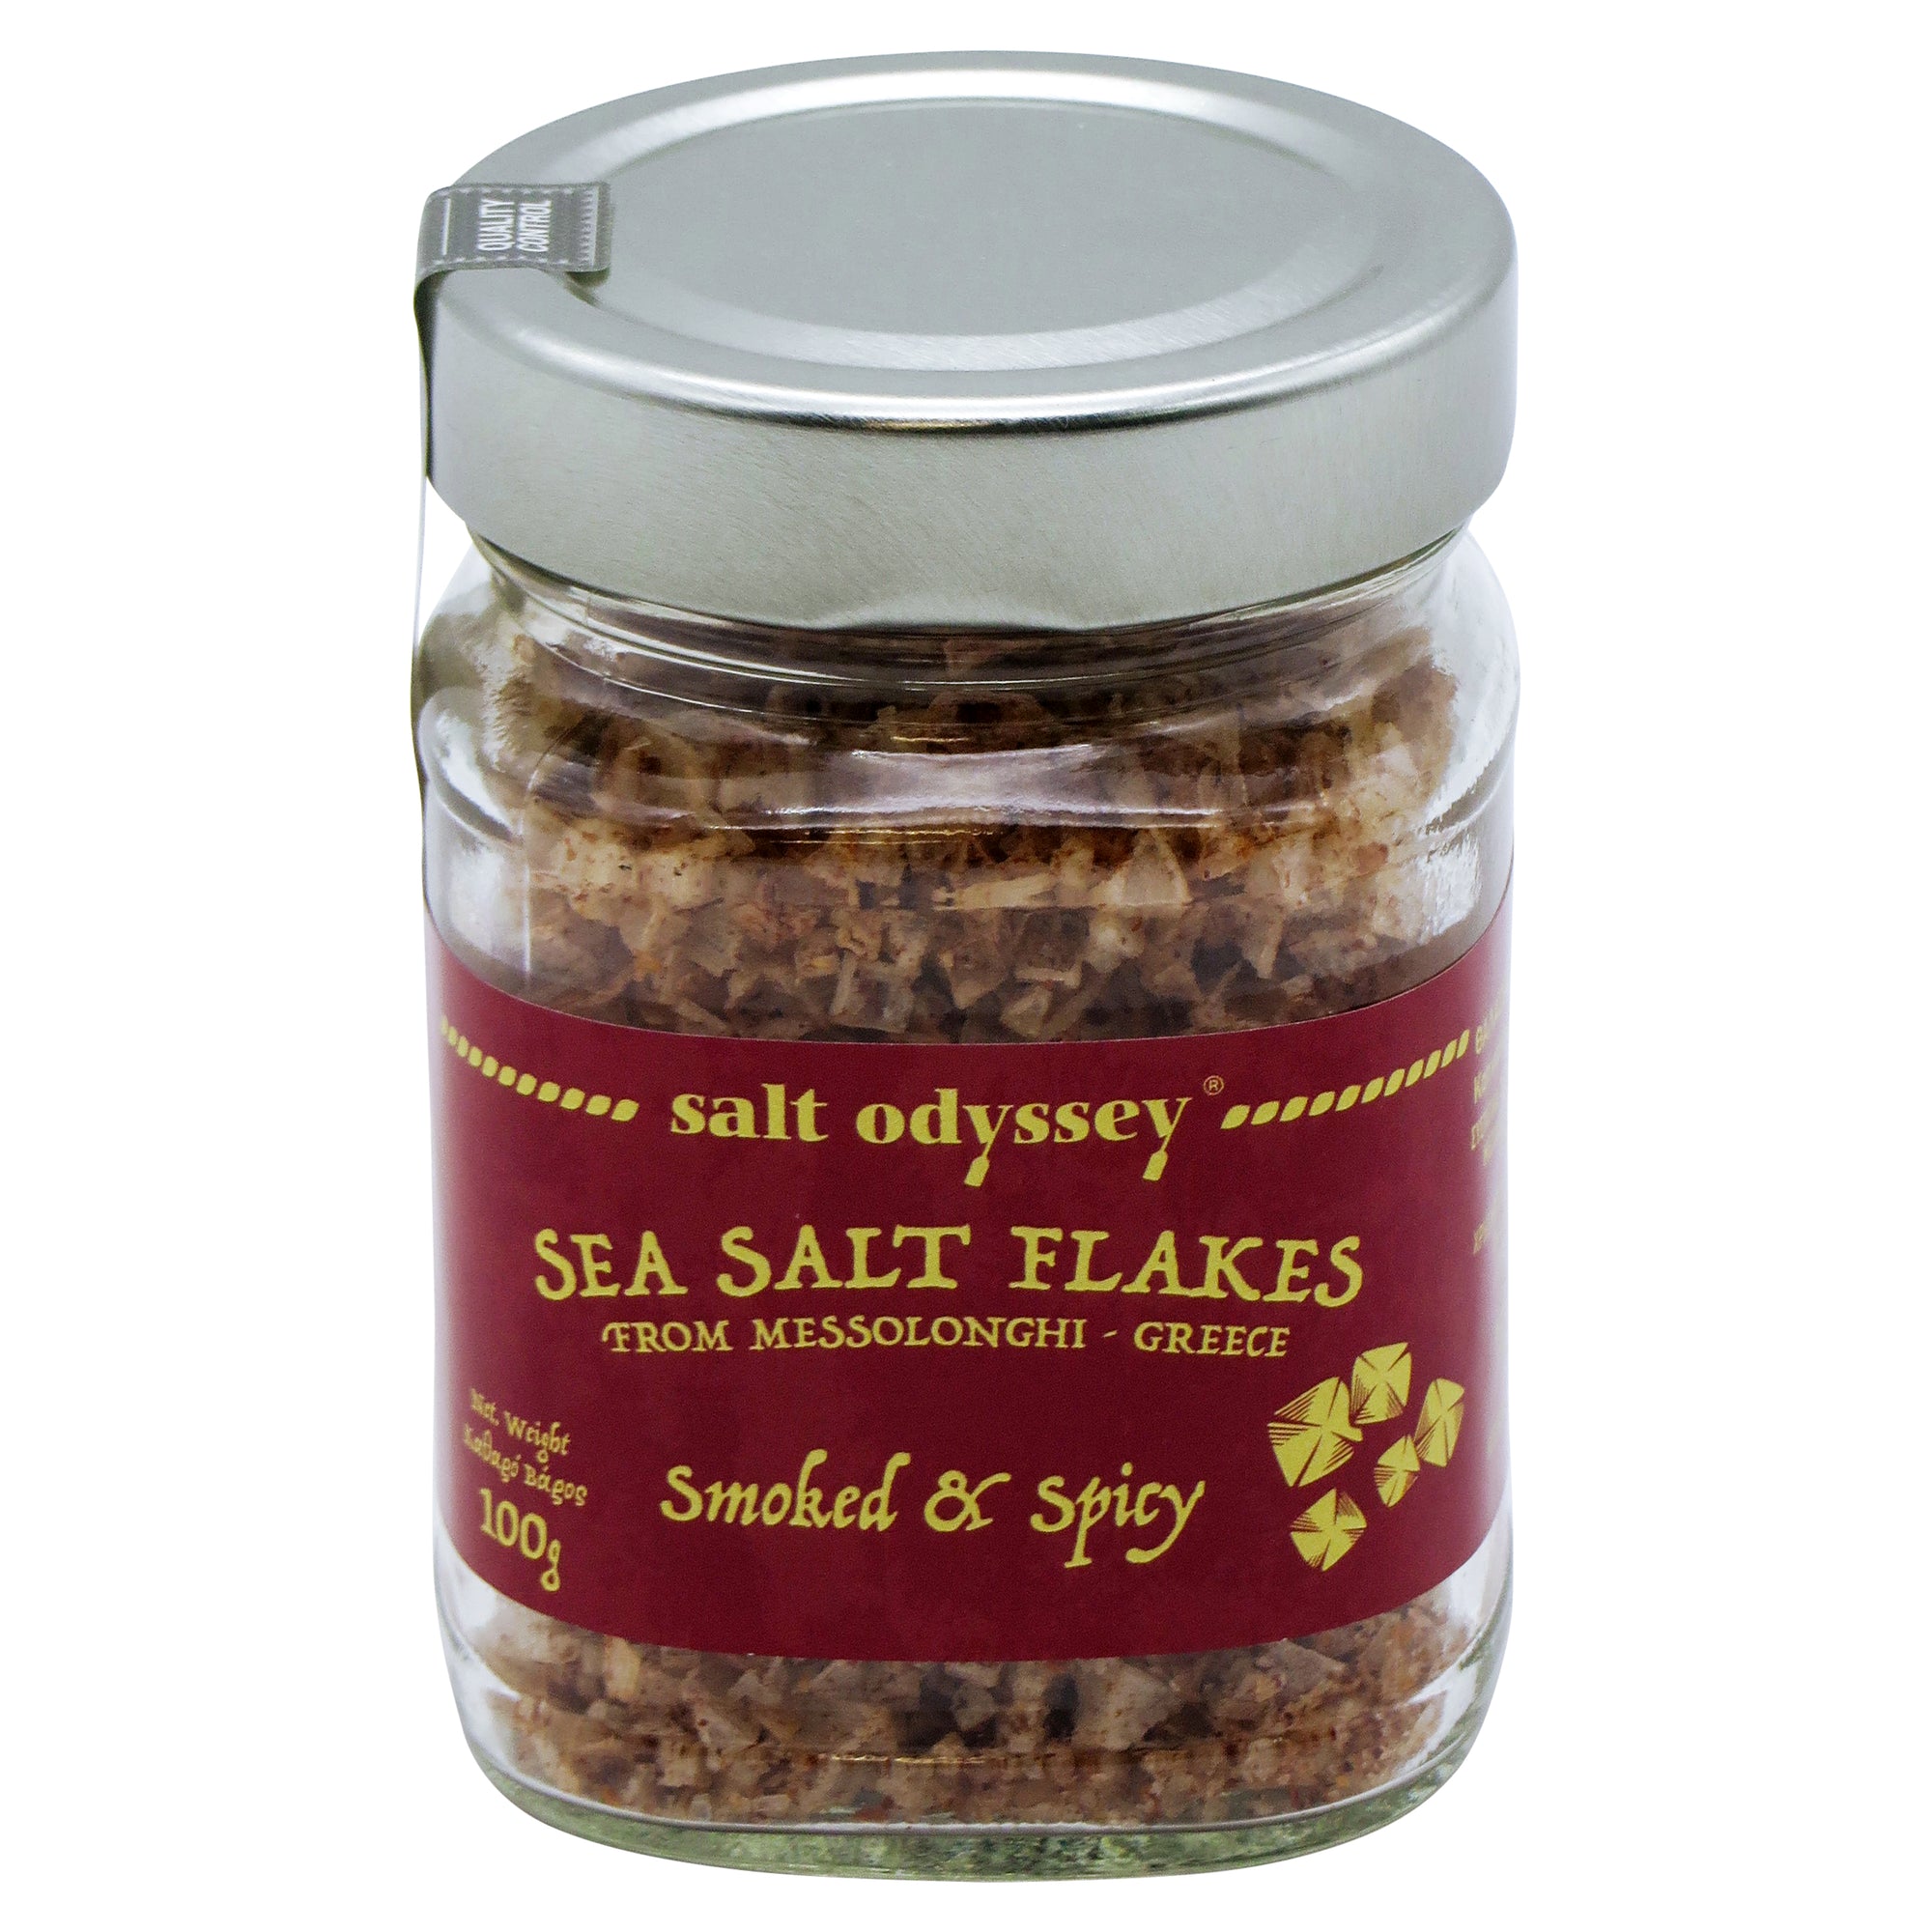 Sea salt flakes smoked and spicy 100g